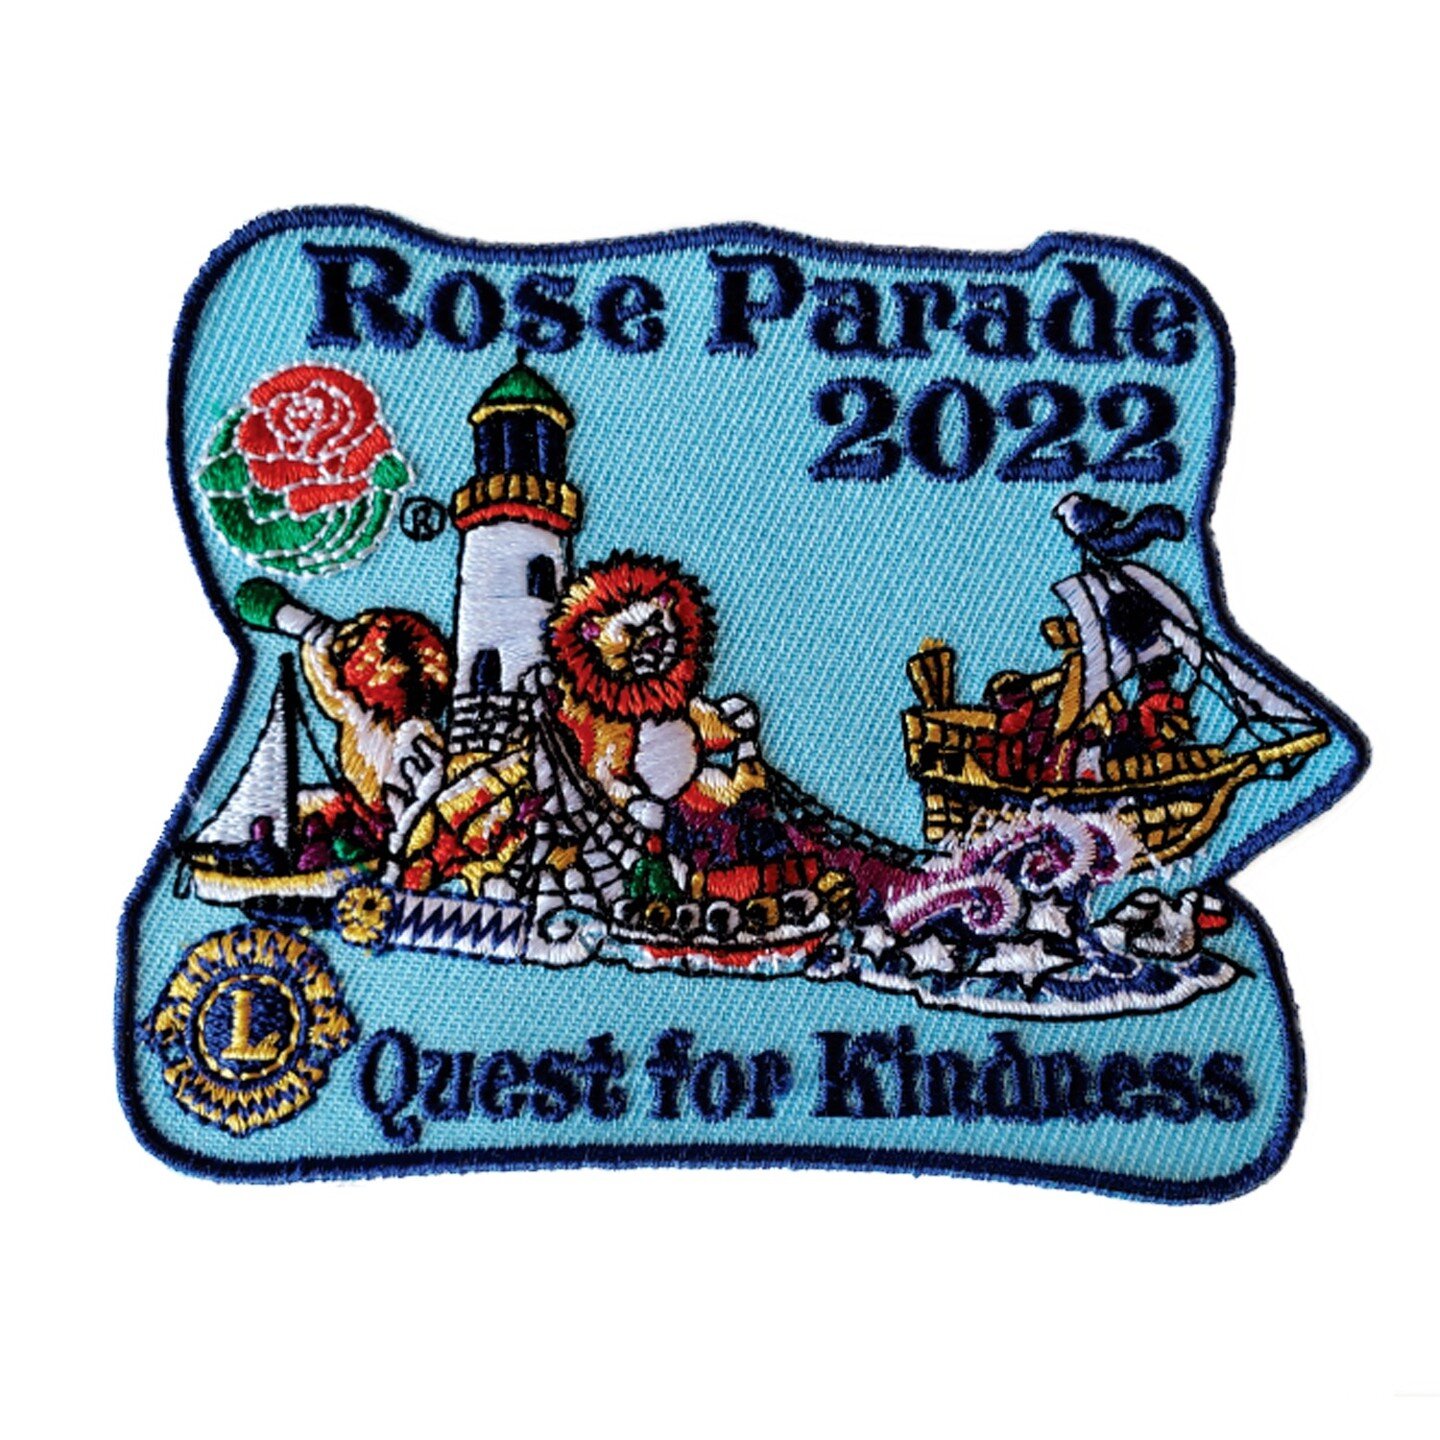 IN-N-OUT 2014 Rose Parade Pin 